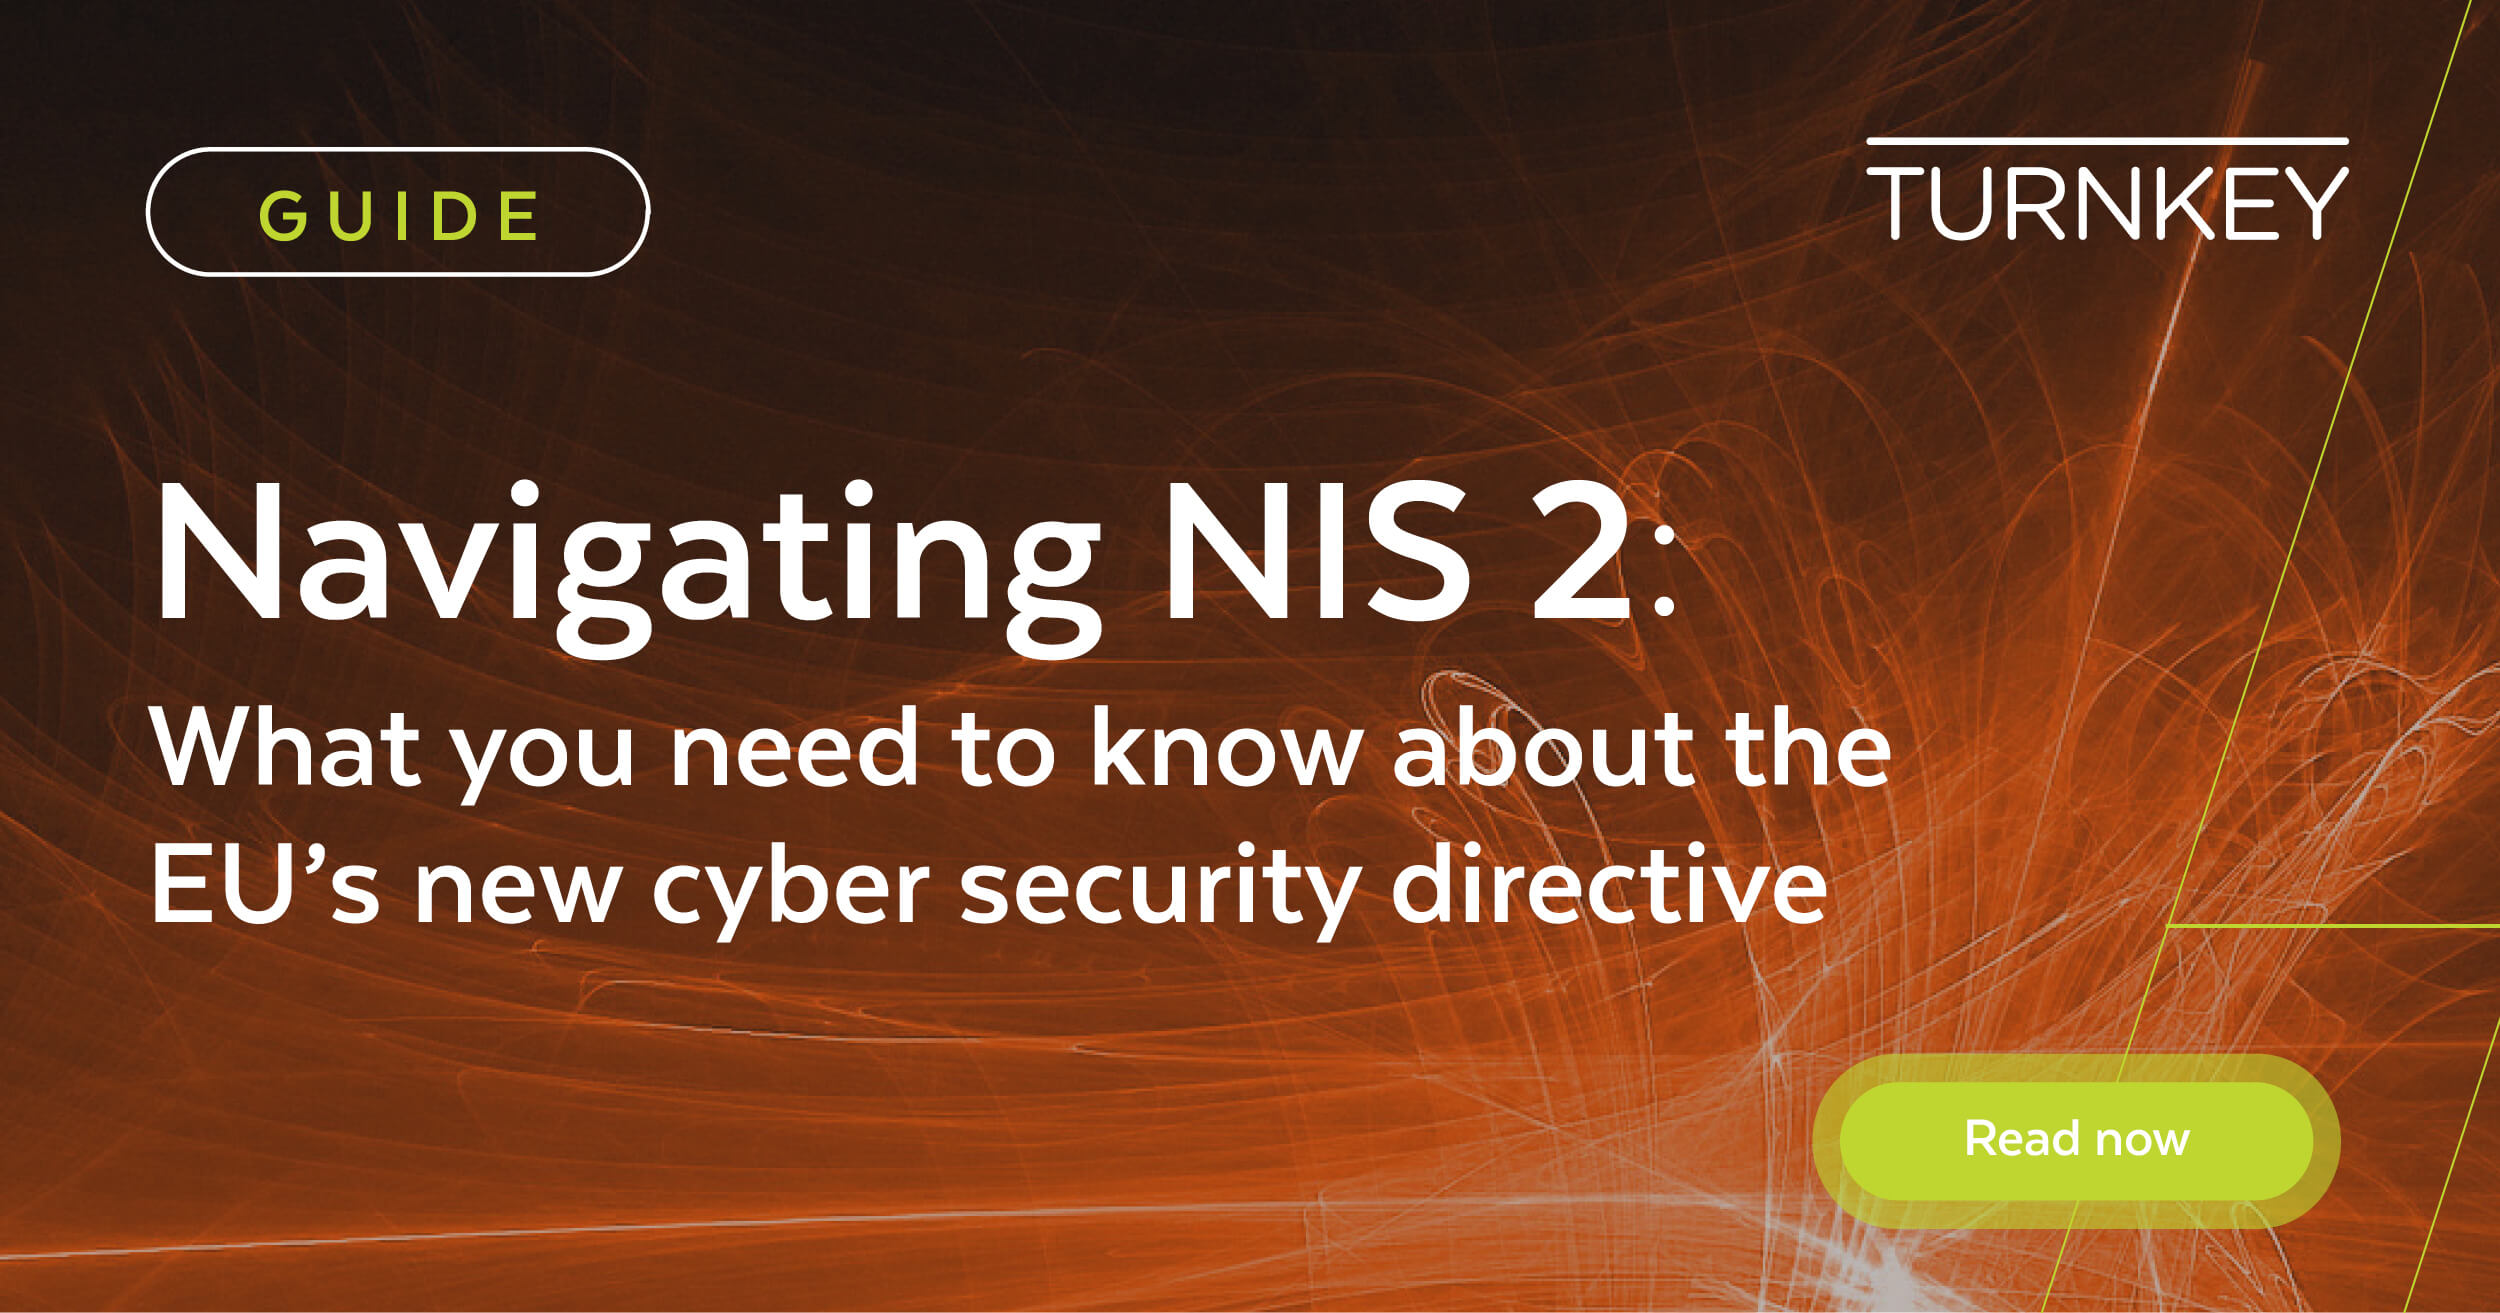 Turnkey NIS2 What you need to know about the EU’s new cyber security directive Guide Banners 12x675 copy